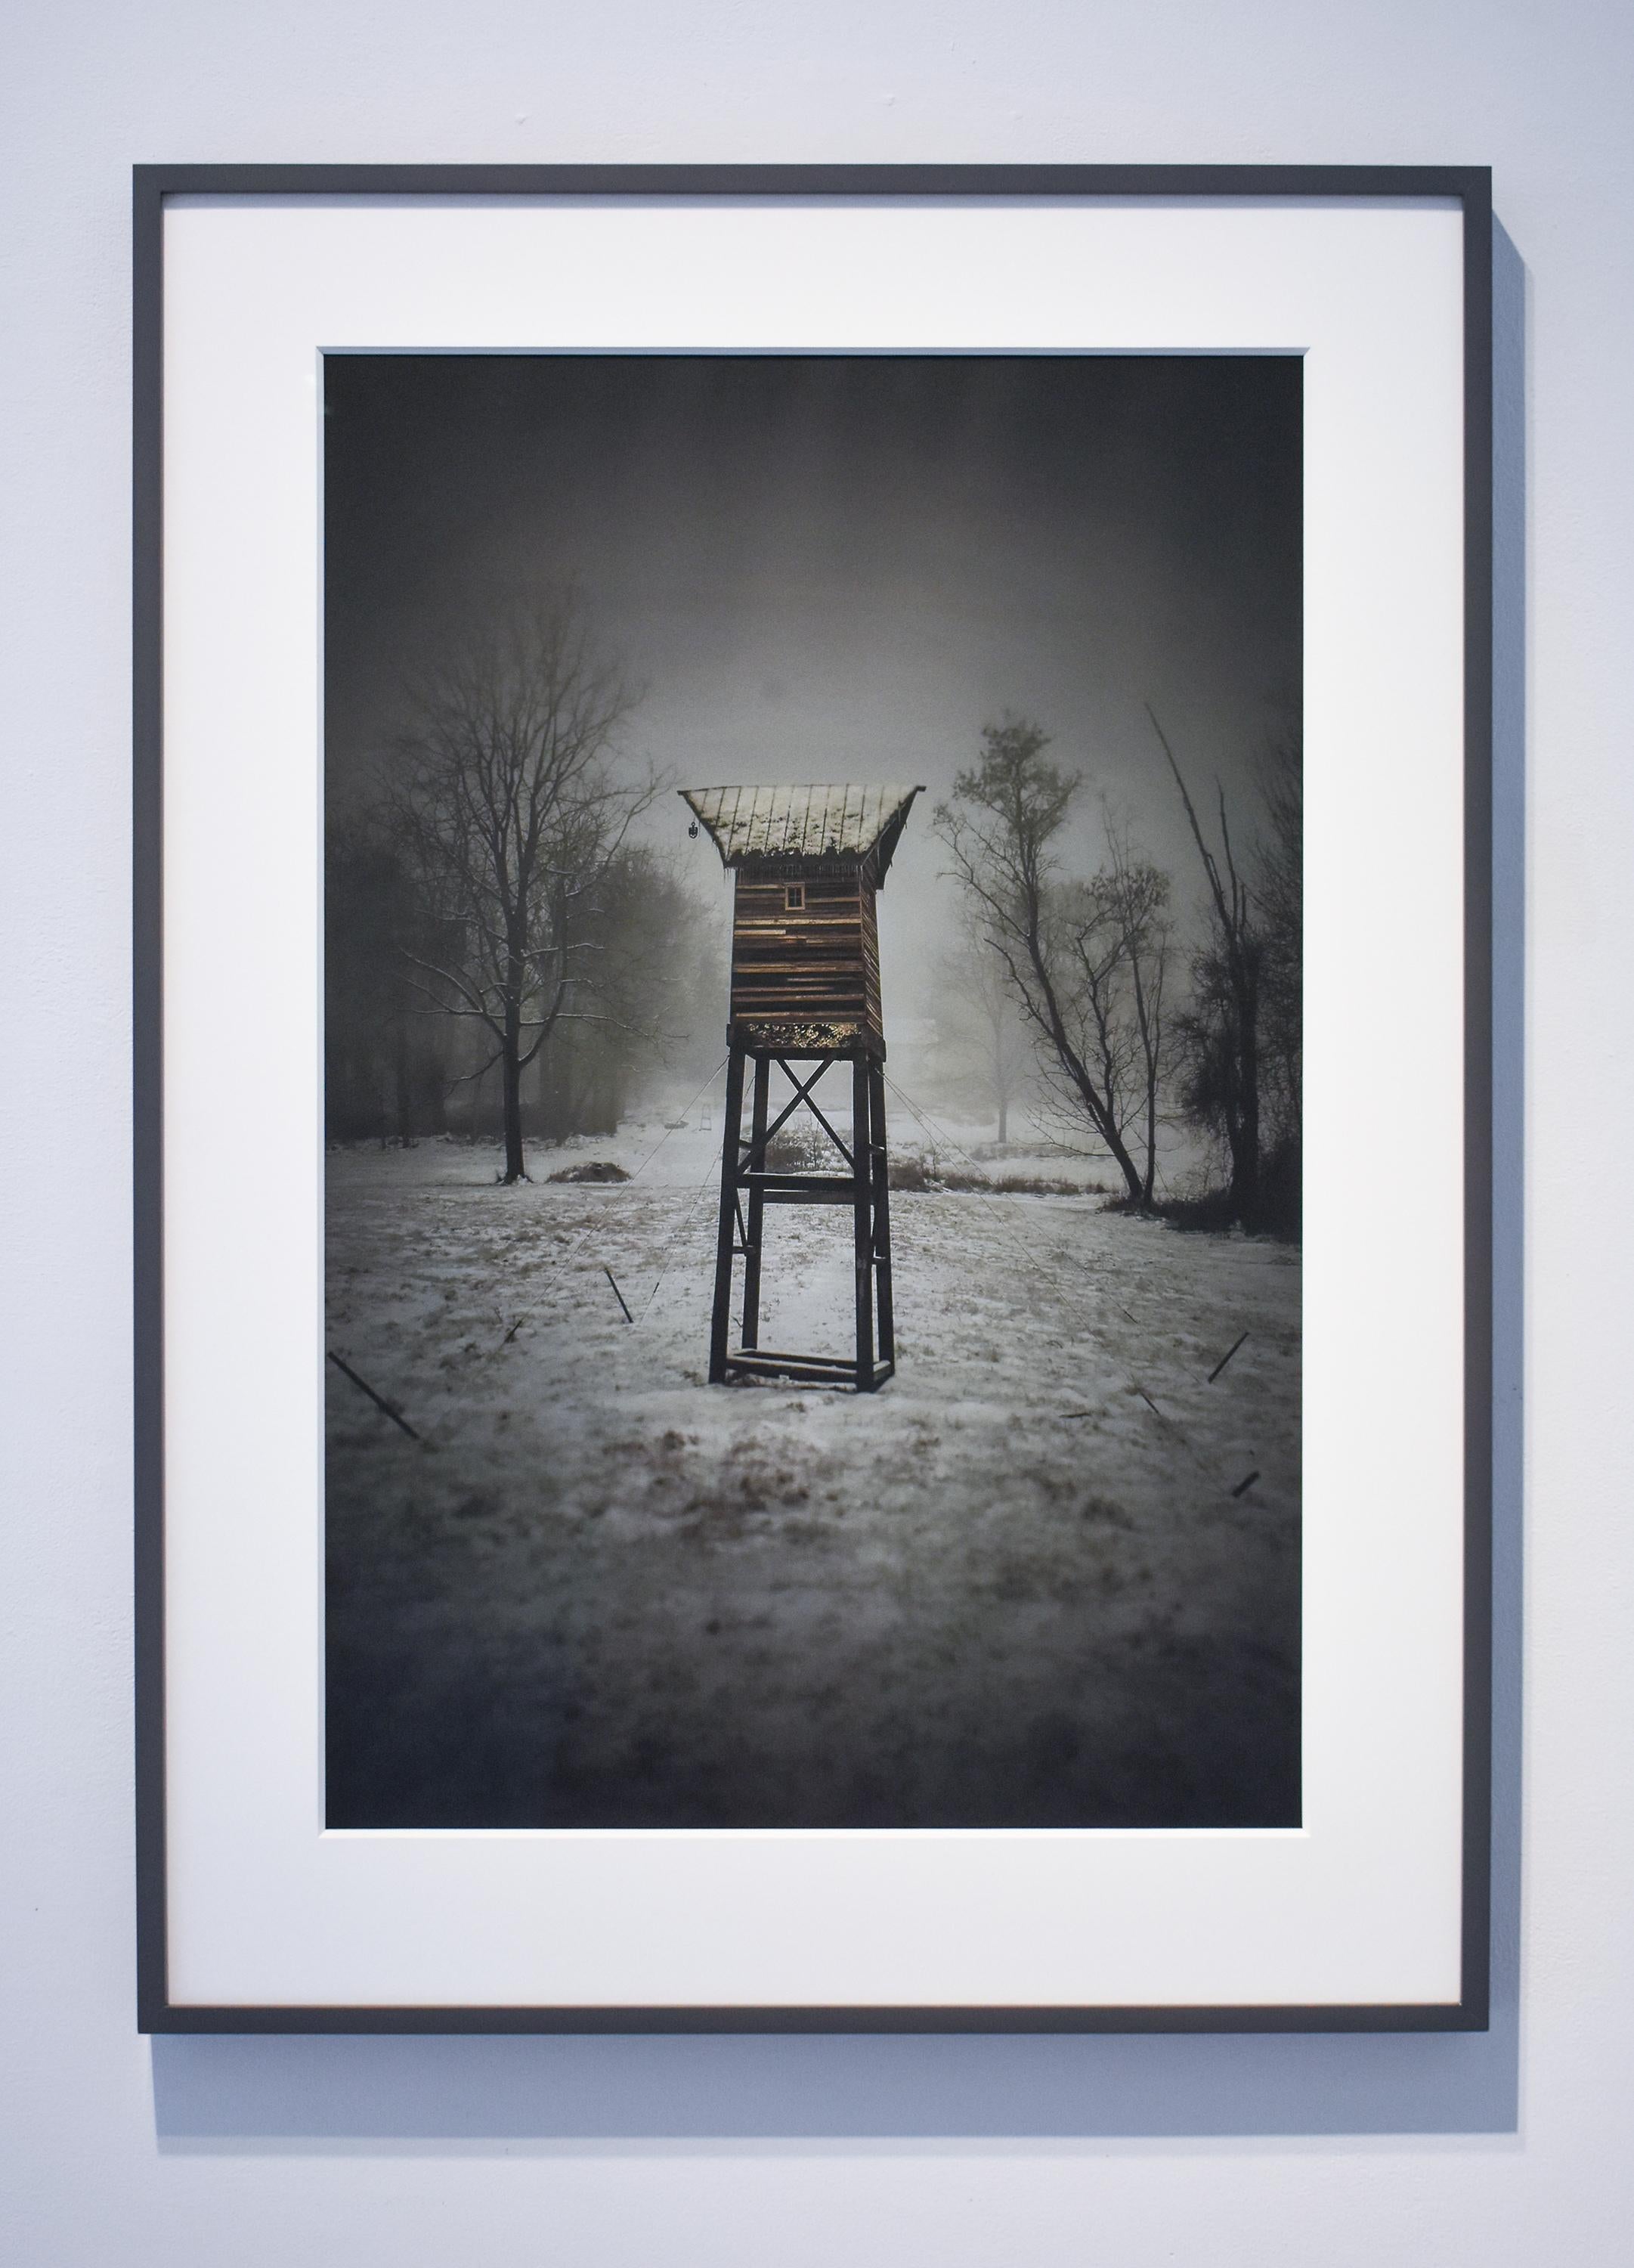 Watch Tower (Contemporary Black & White Landscape Photo of Structure in Woods) - Photograph by Robert Hite